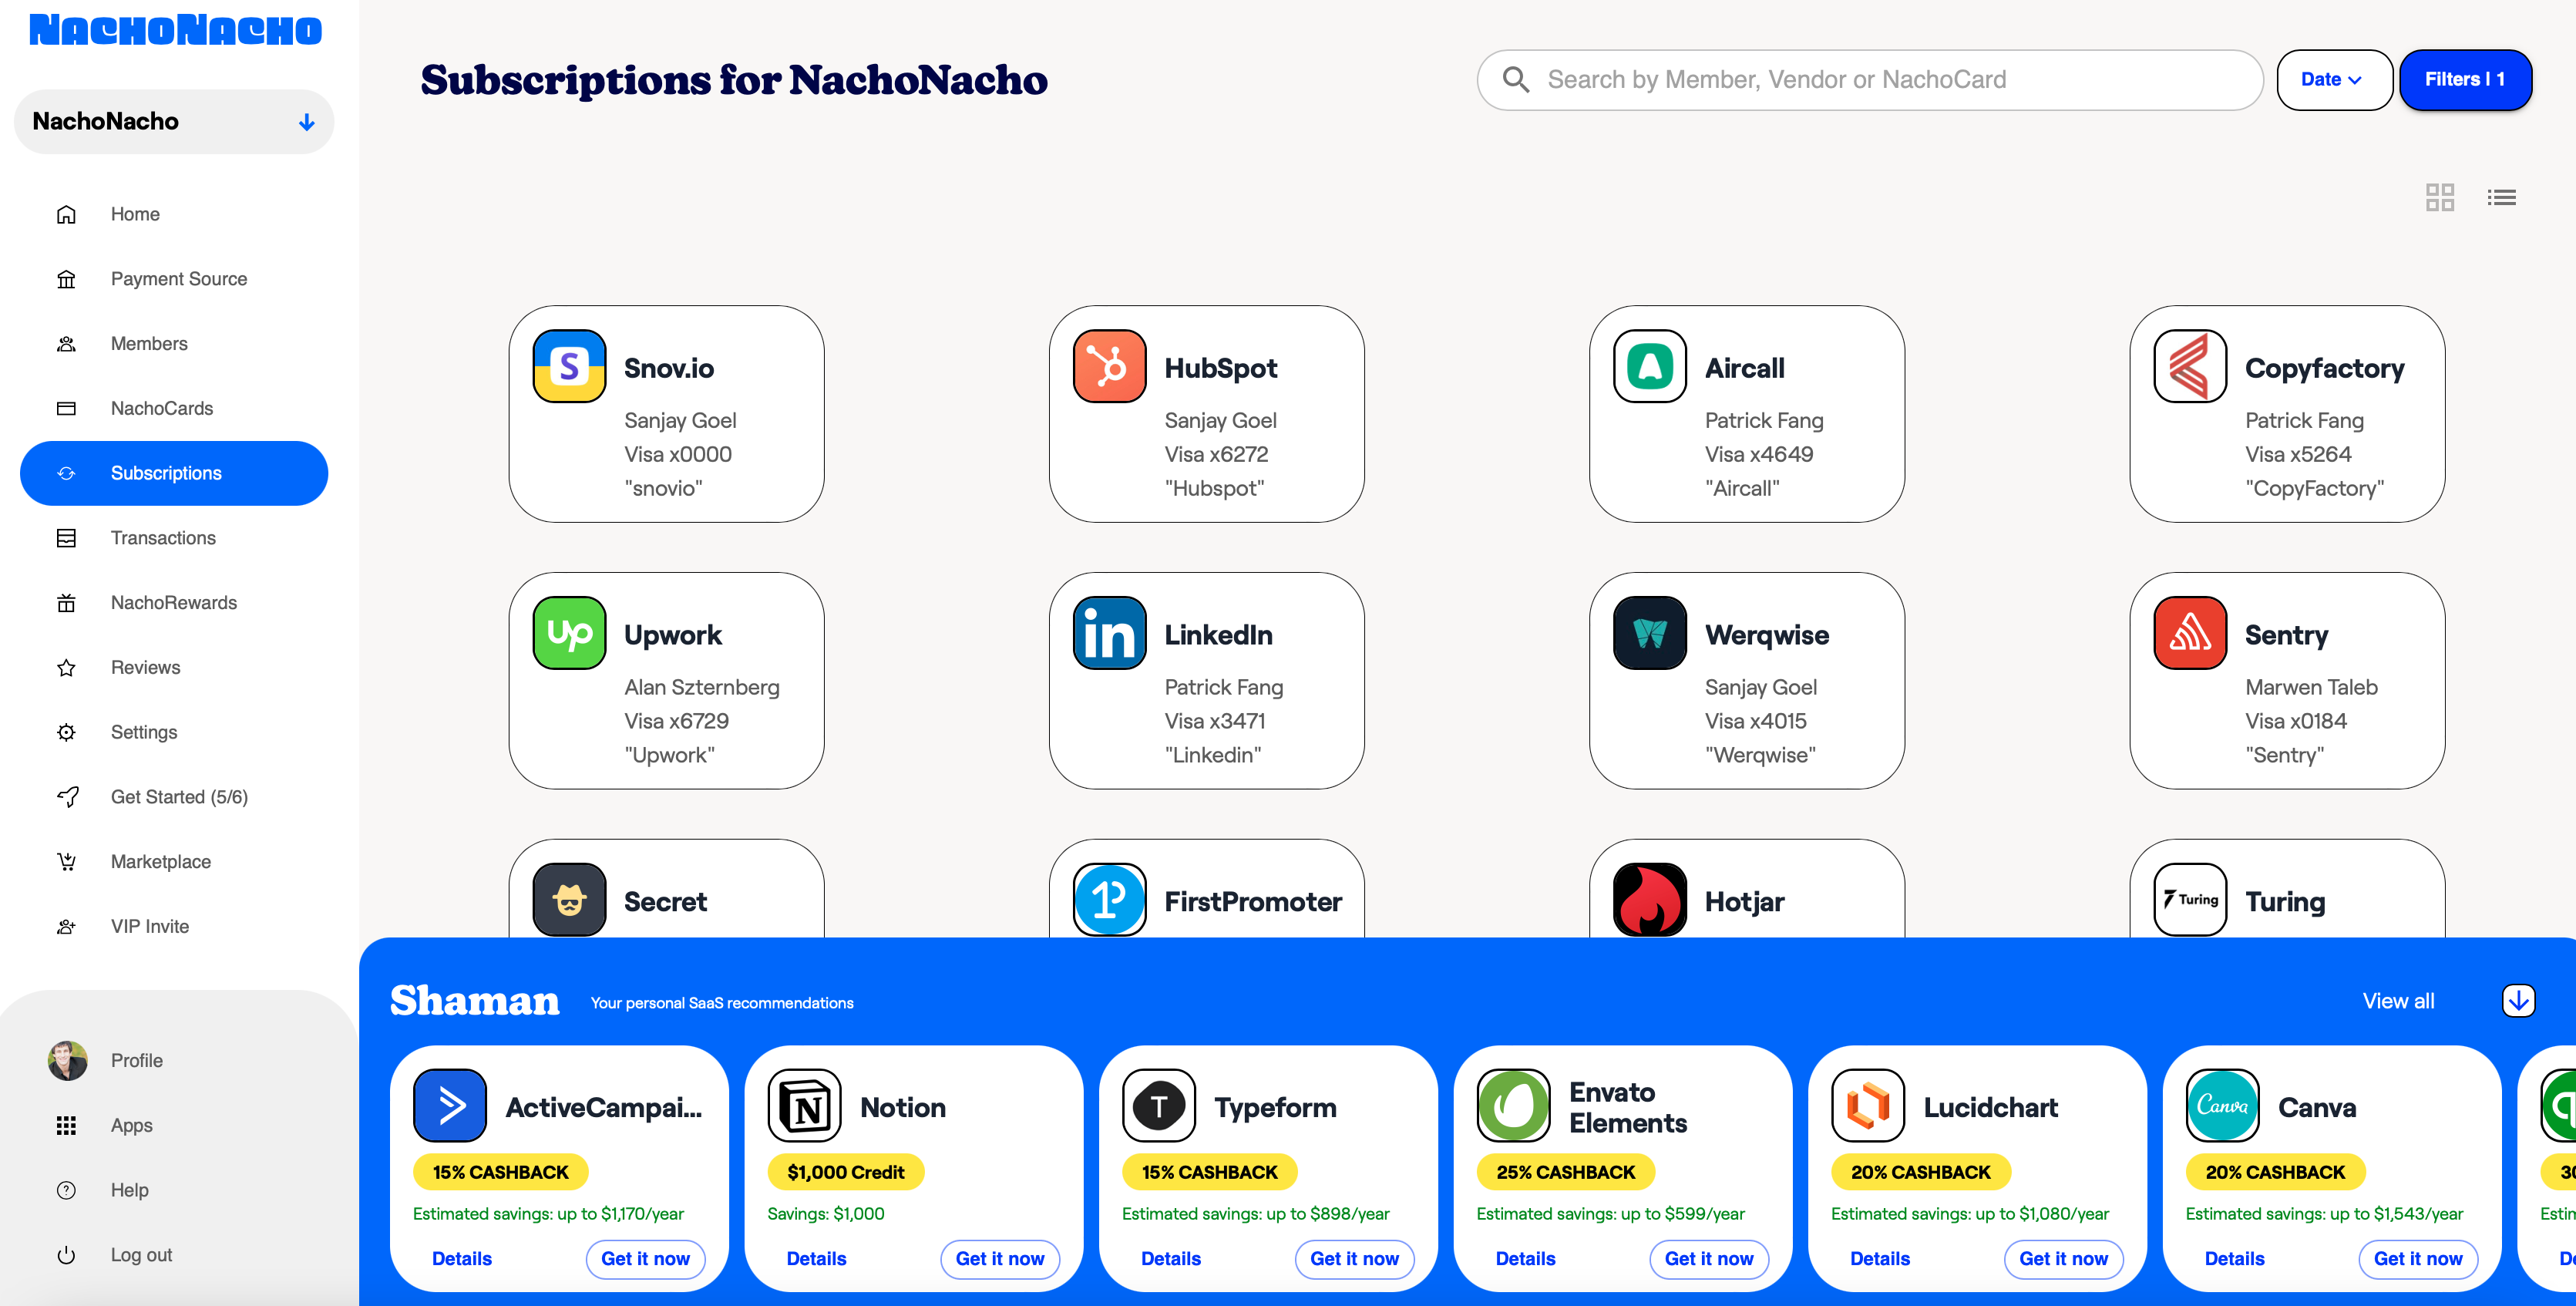 Meet Shaman: Smart personalized software recommendations. Based on your current SaaS stack, company profile, usage patterns of other users like you, and SaaS vendor data, Shaman provides smart recommendations for leading tools you might need.